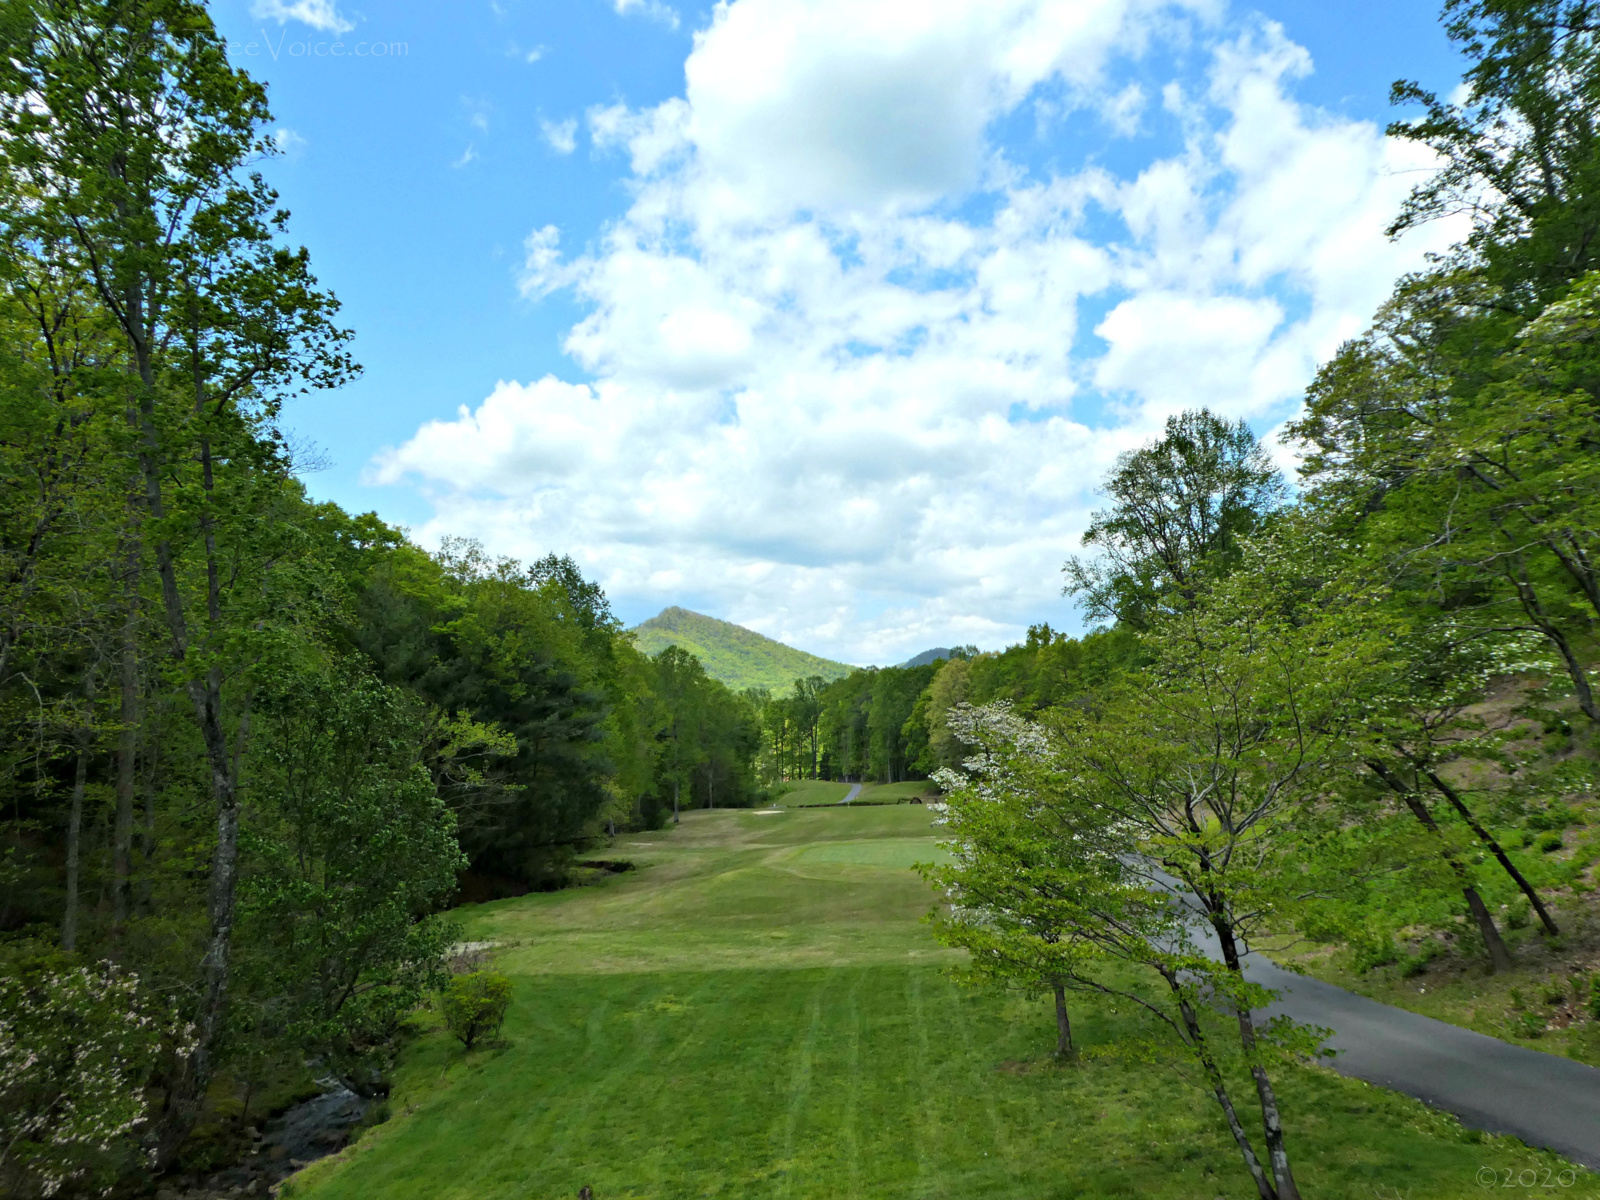 April 21, 2020 - Looking back on Hole 3 from Hole 4 tee box